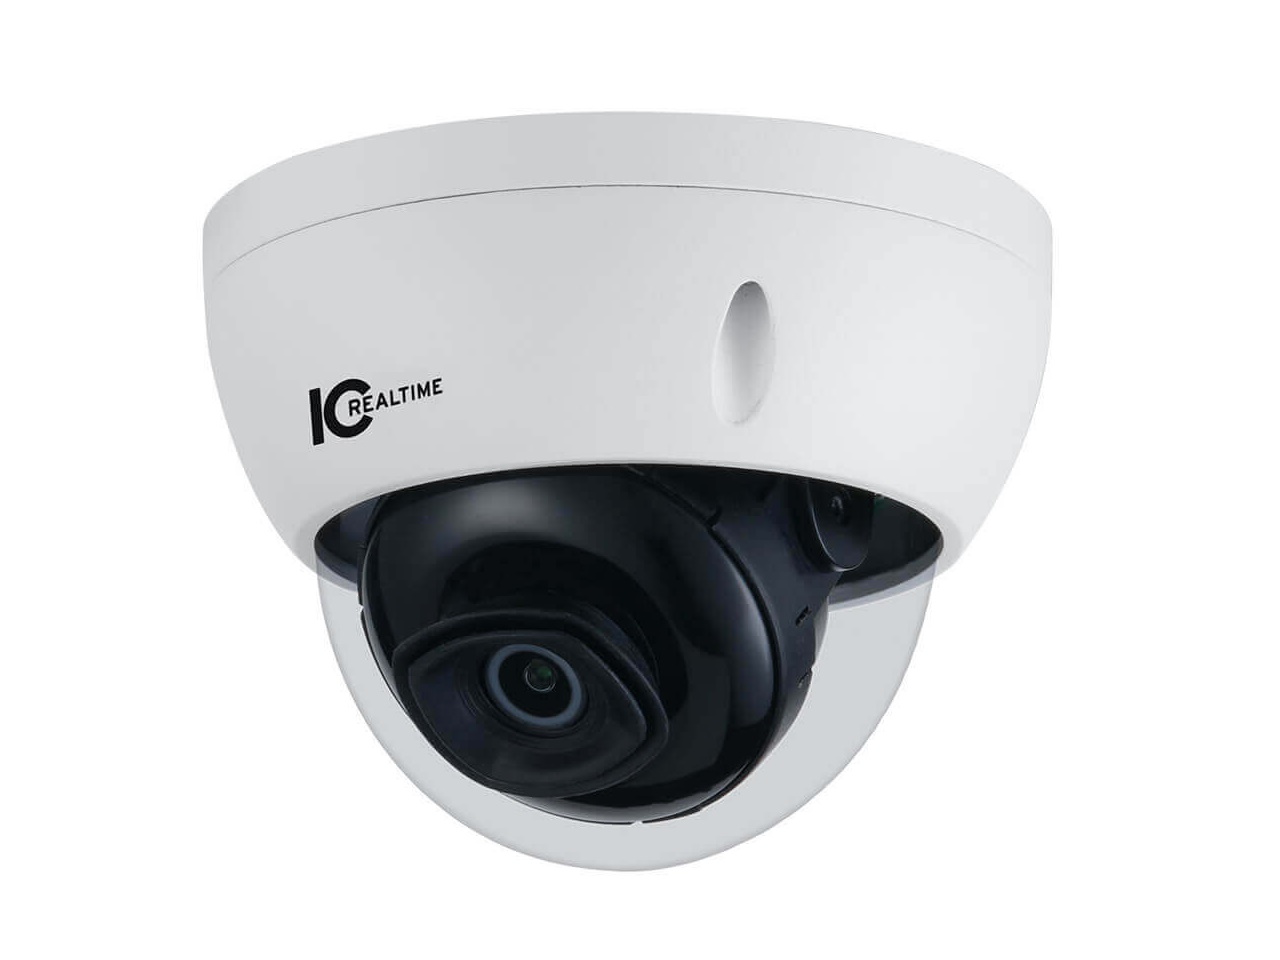 IPEG-D20F-IRW3 2MP IP Indoor/Outdoor Small Size Vandal Dome Camera/Fixed 2.8mm Lens/98ft IR/PoE Capable by ICRealtime